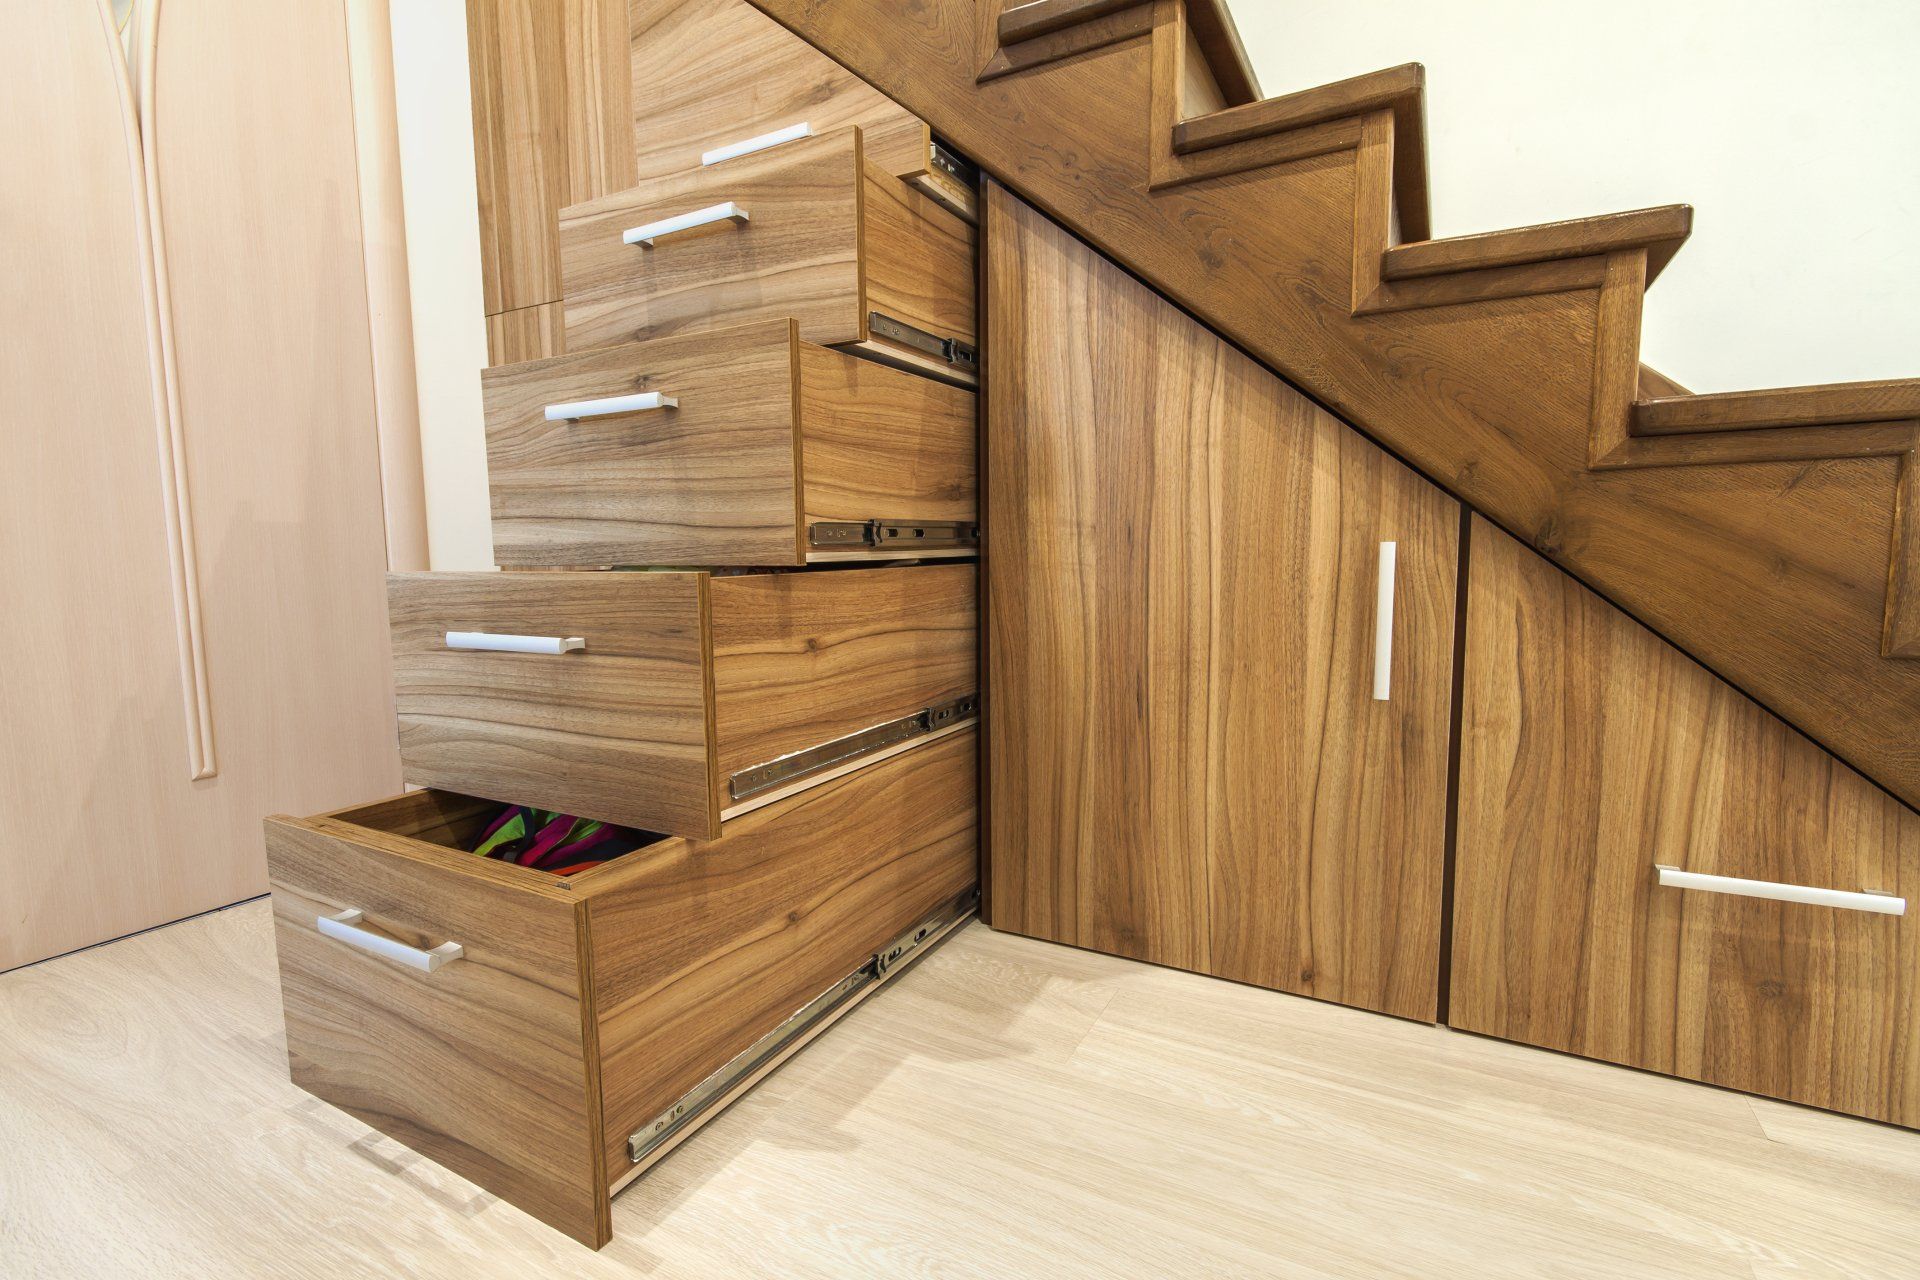 Modern architecture interior with luxury hallway with glossy wooden stairs in modern storey house. Custom built pullout cabinets on glides in slots under stairs. Use of space for storage.